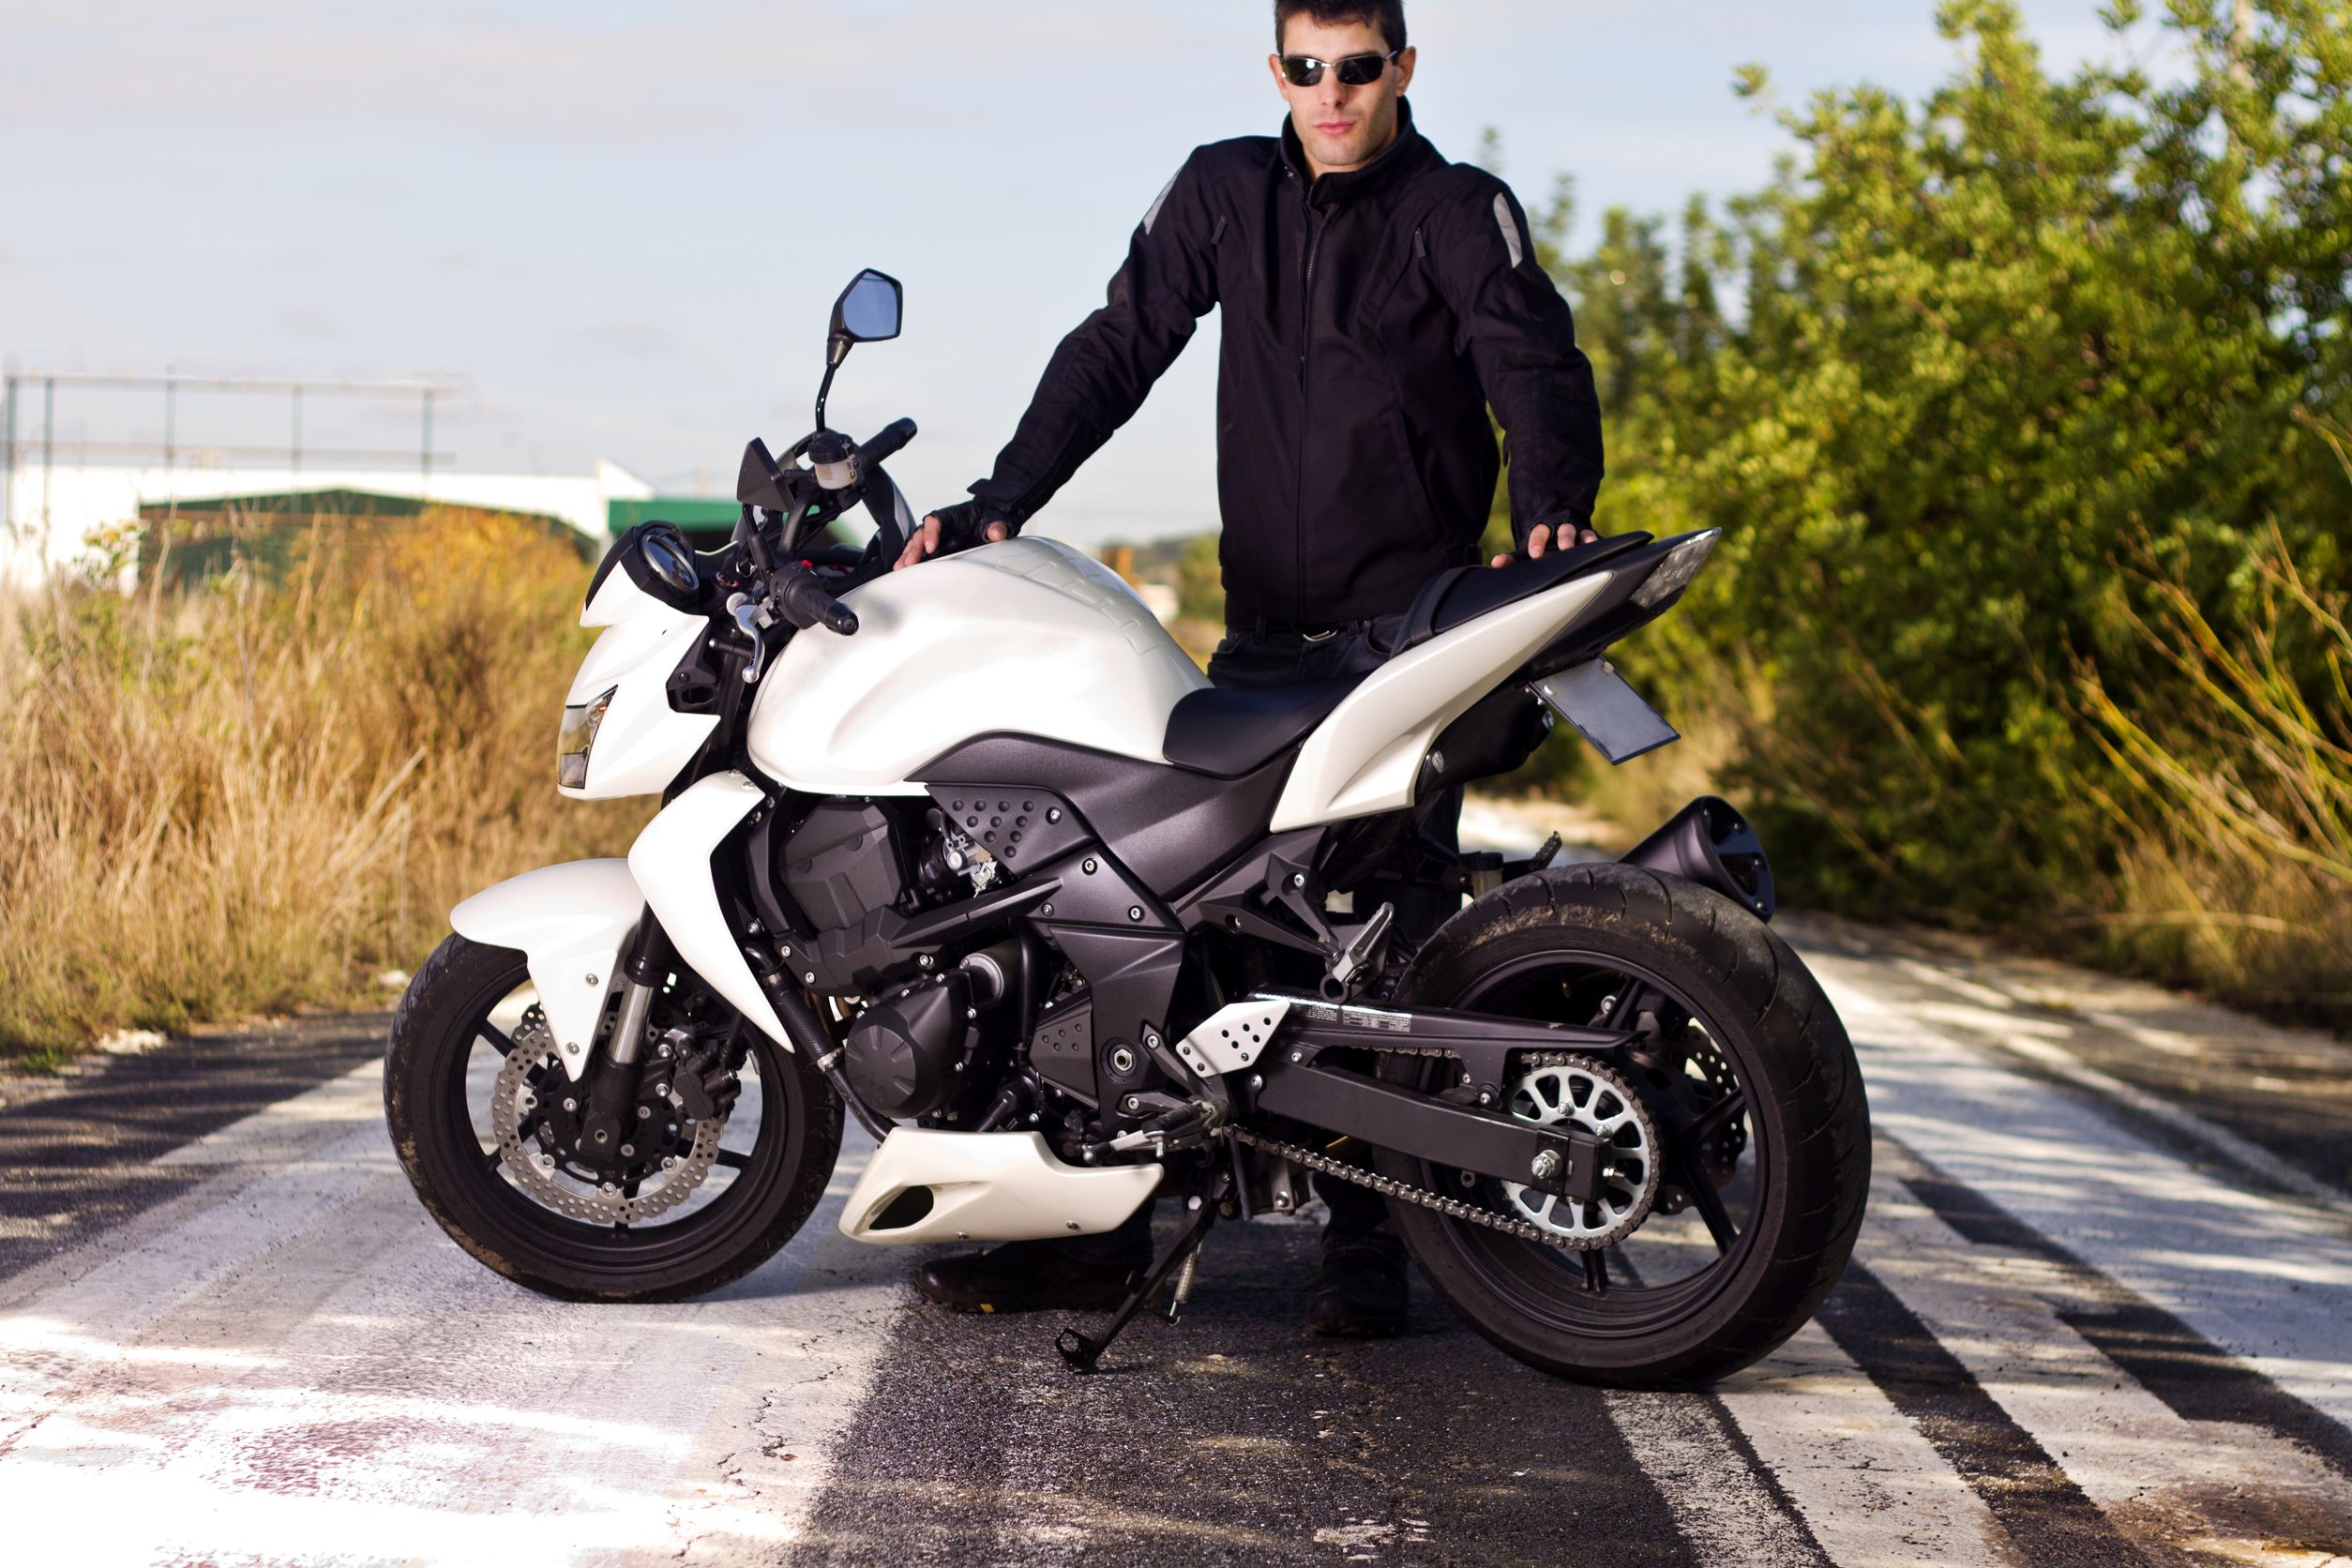 Rent BMW Motorcycles in West Palm Beach for the Ultimate Sightseeing